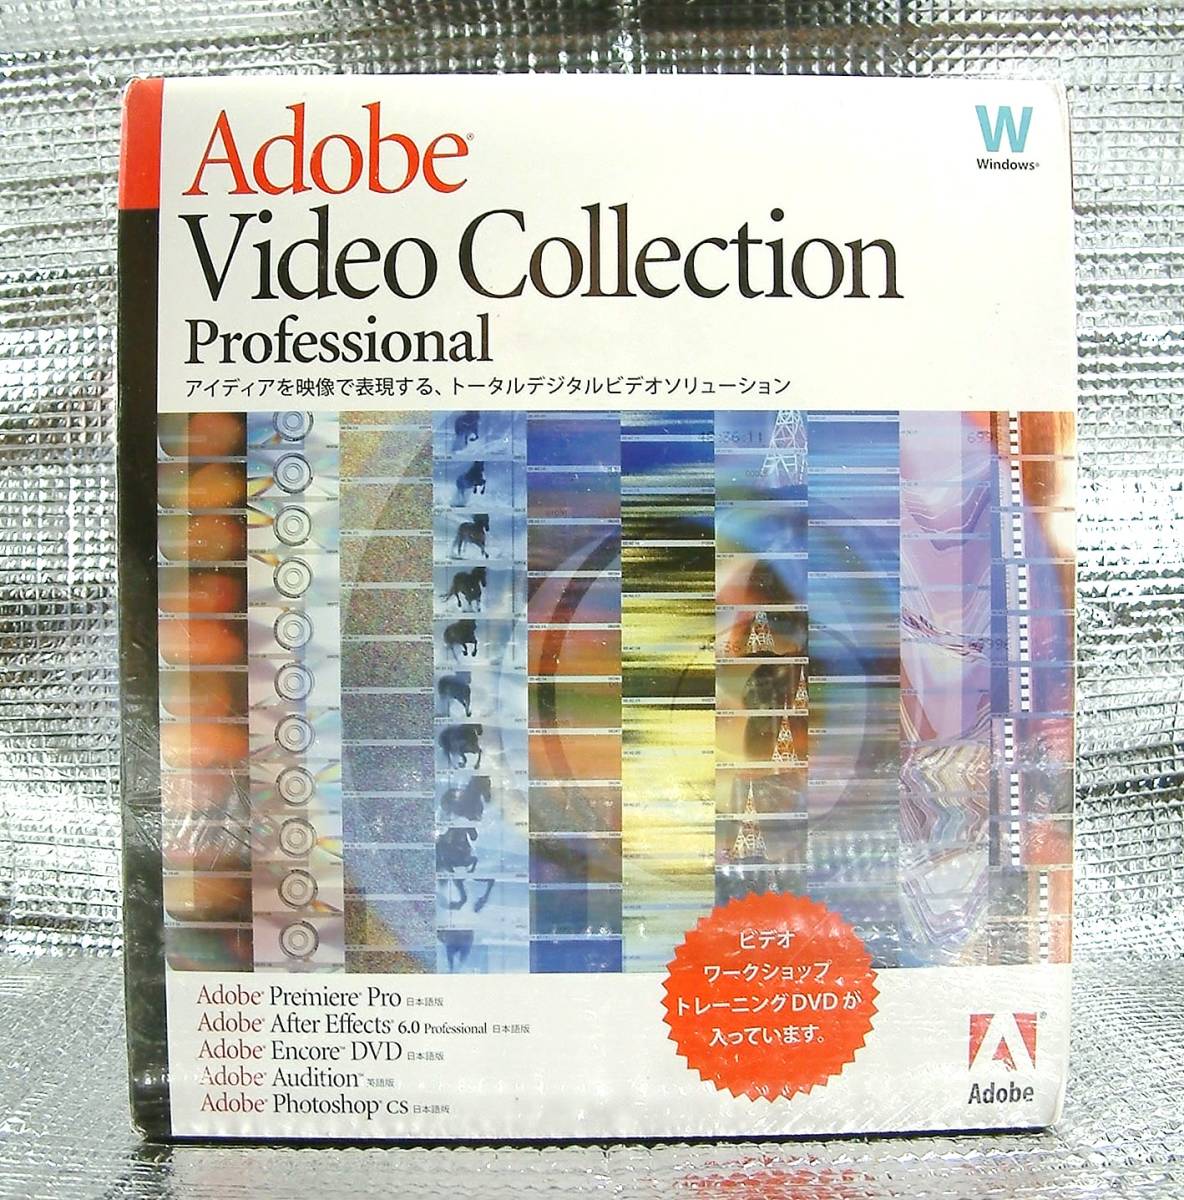 【3487】 Adobe Video Collection Pro 未開封品 アドビ ビデオ コレクション After Effects，Audition，Premiere，Photoshop CS，Encore DVD